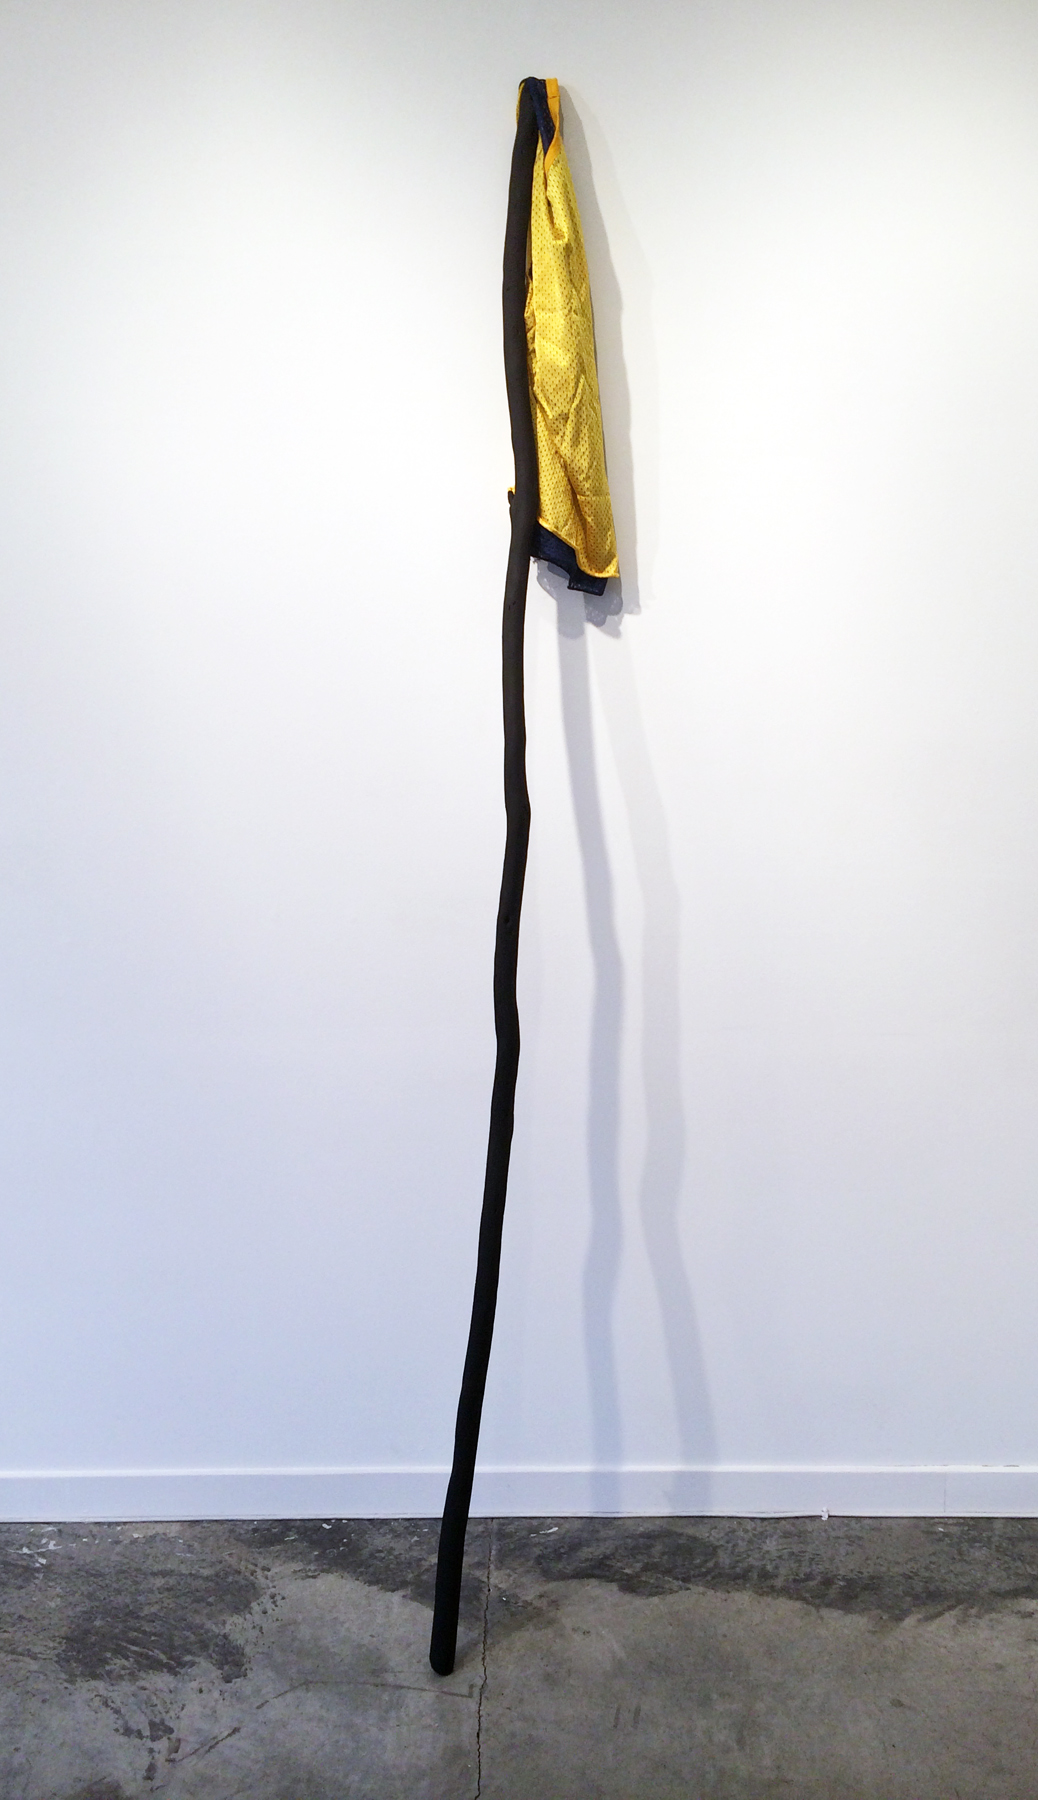   JOSEPH HART   Untitled , athletic jersey, acrylic and found tree branch, 90" x 14" x 16", 2014 